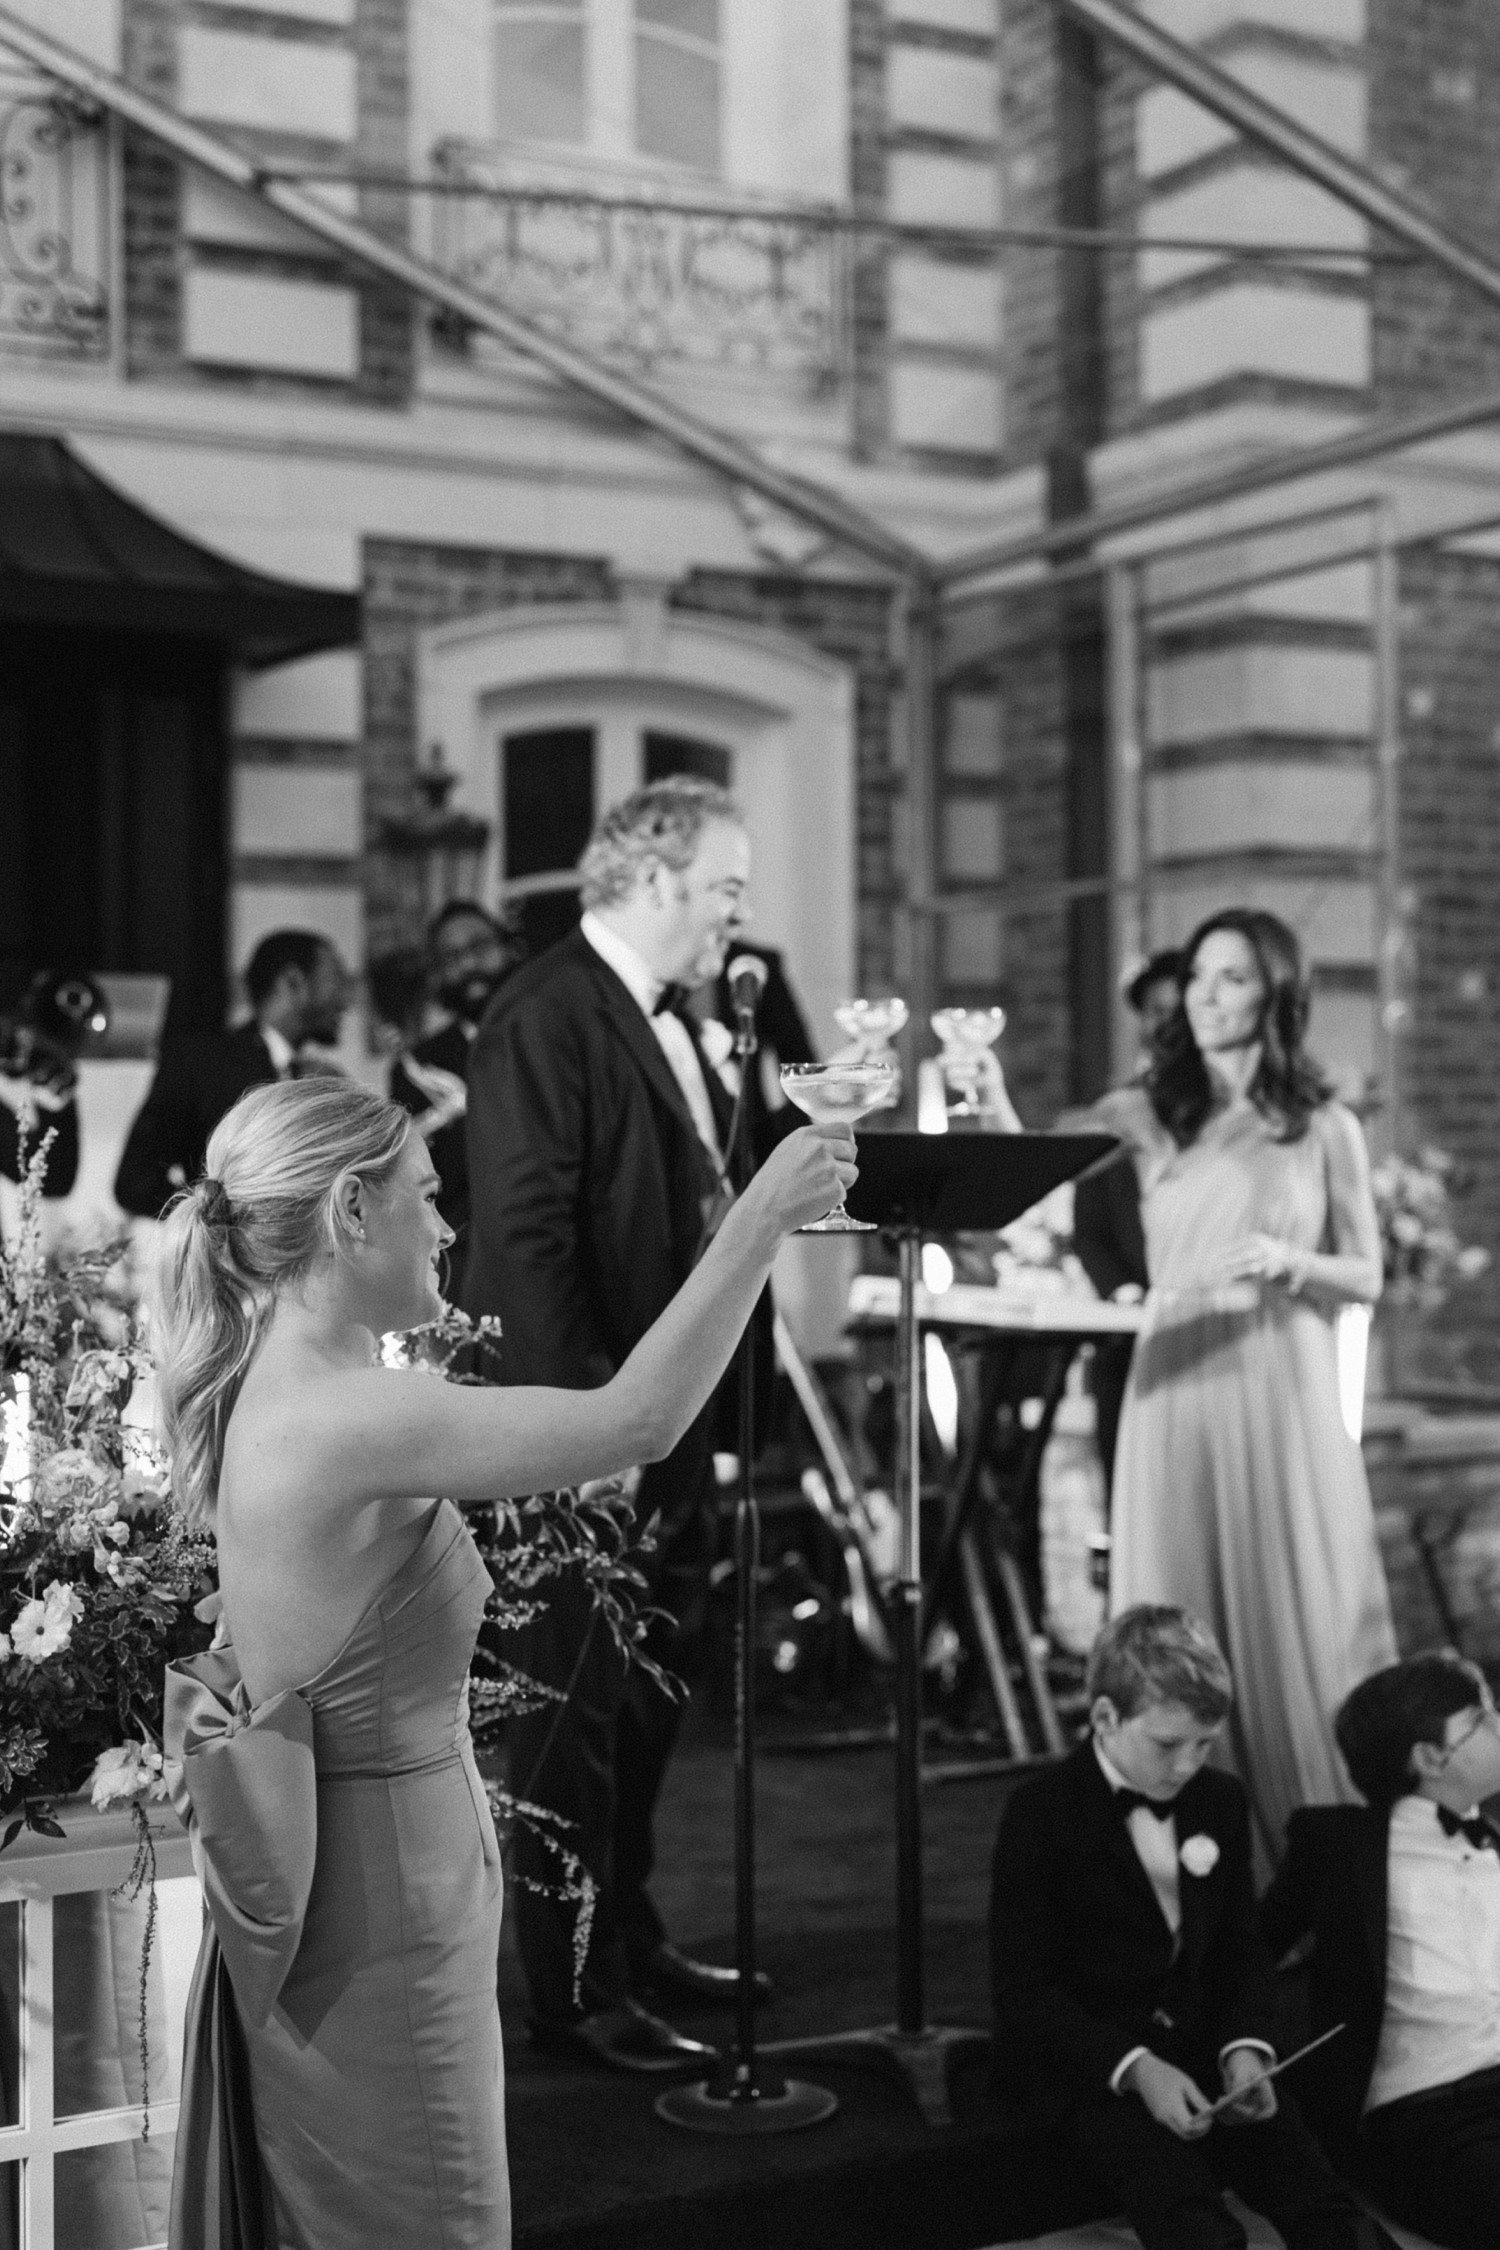 Wedding Toast by Father of Bride